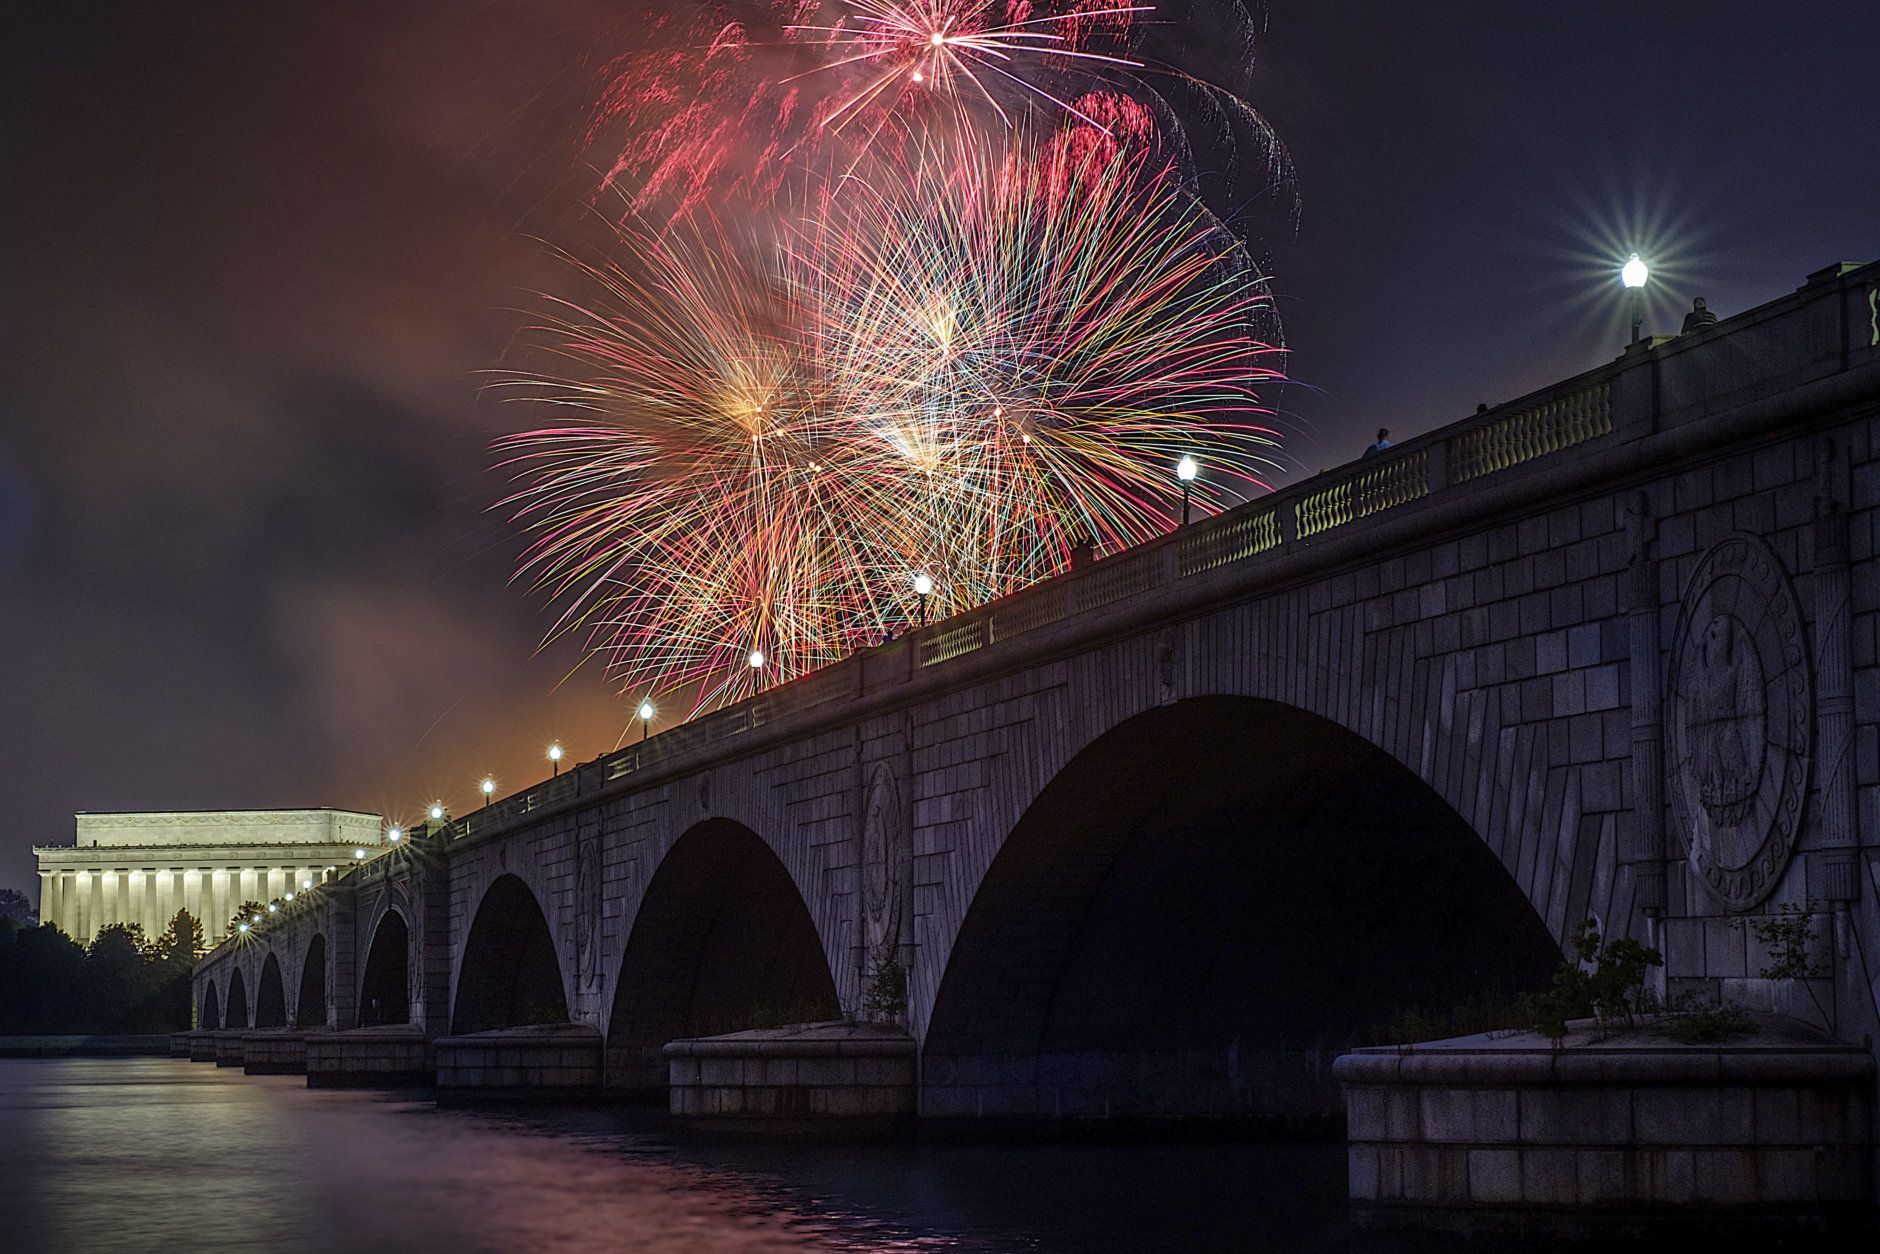 Fireworks burst over the Memorial Bridge and Lincoln Memorial during Independence Day celebrations on the National Mall in Washington, Tuesday, July 4, 2017. (AP Photo/J. David Ake)